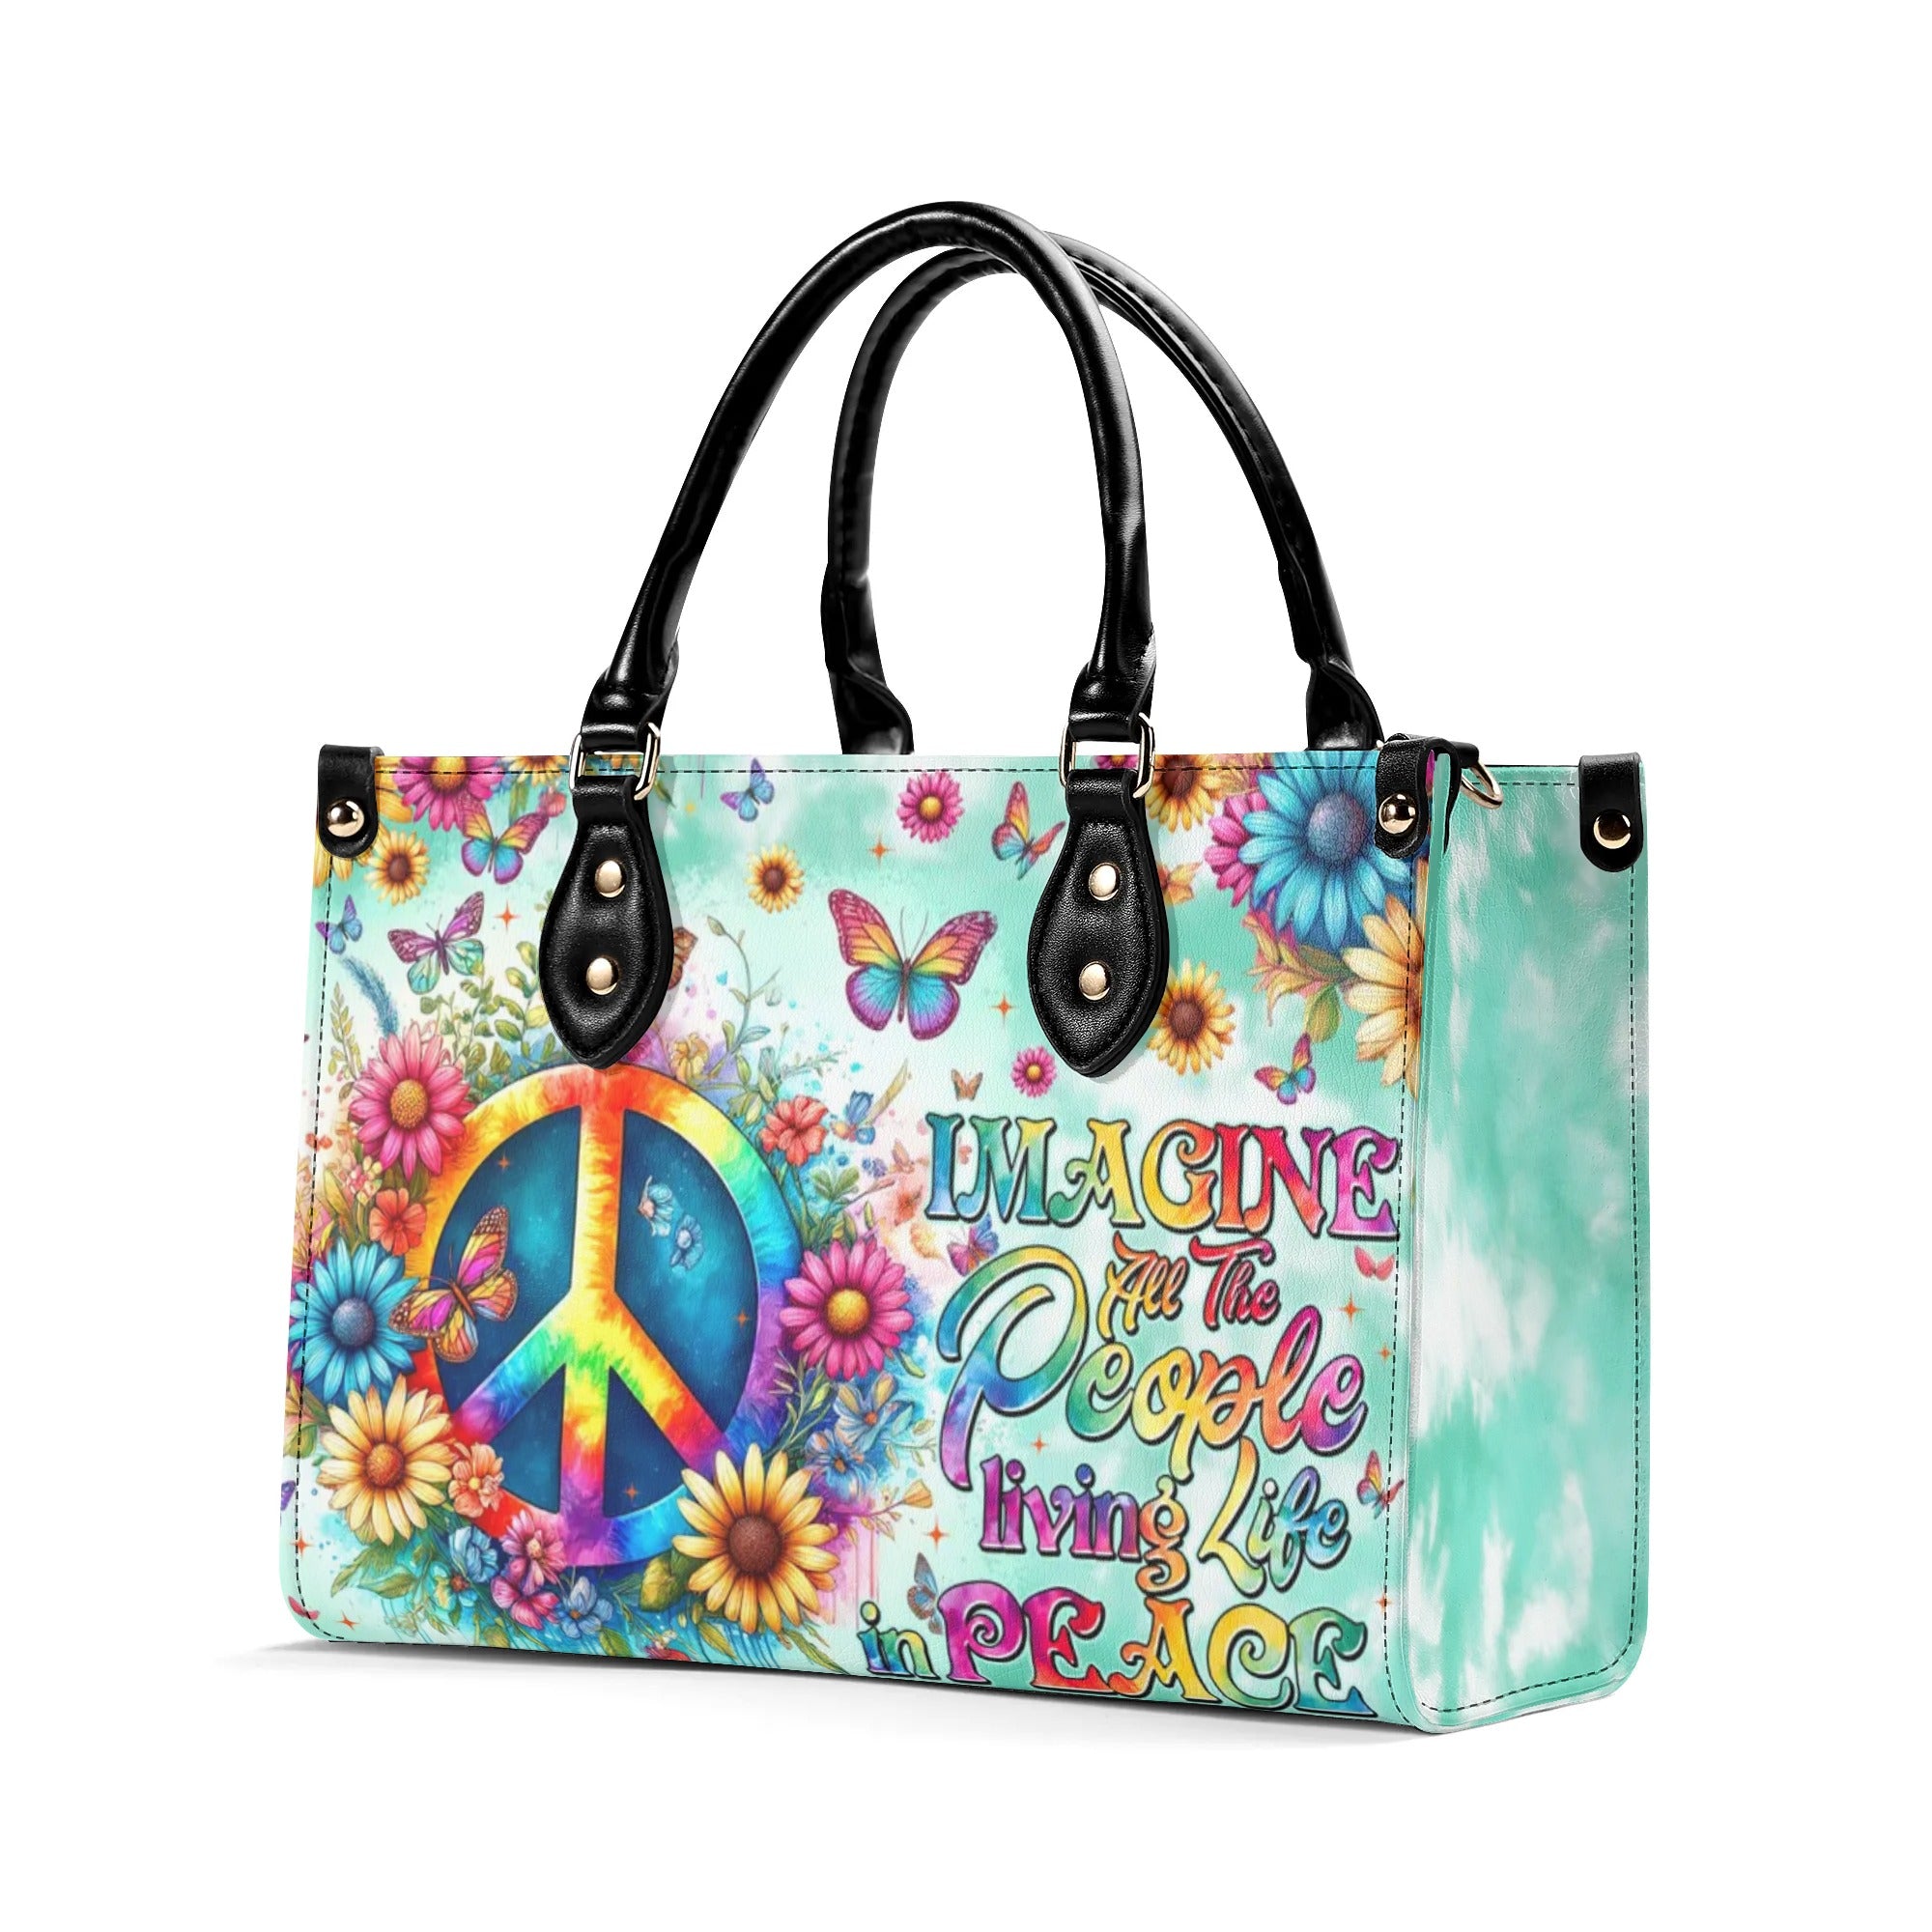 IMAGINE ALL THE PEOPLE LIVING LIFE IN PEACE LEATHER HANDBAG - TYTM2905241